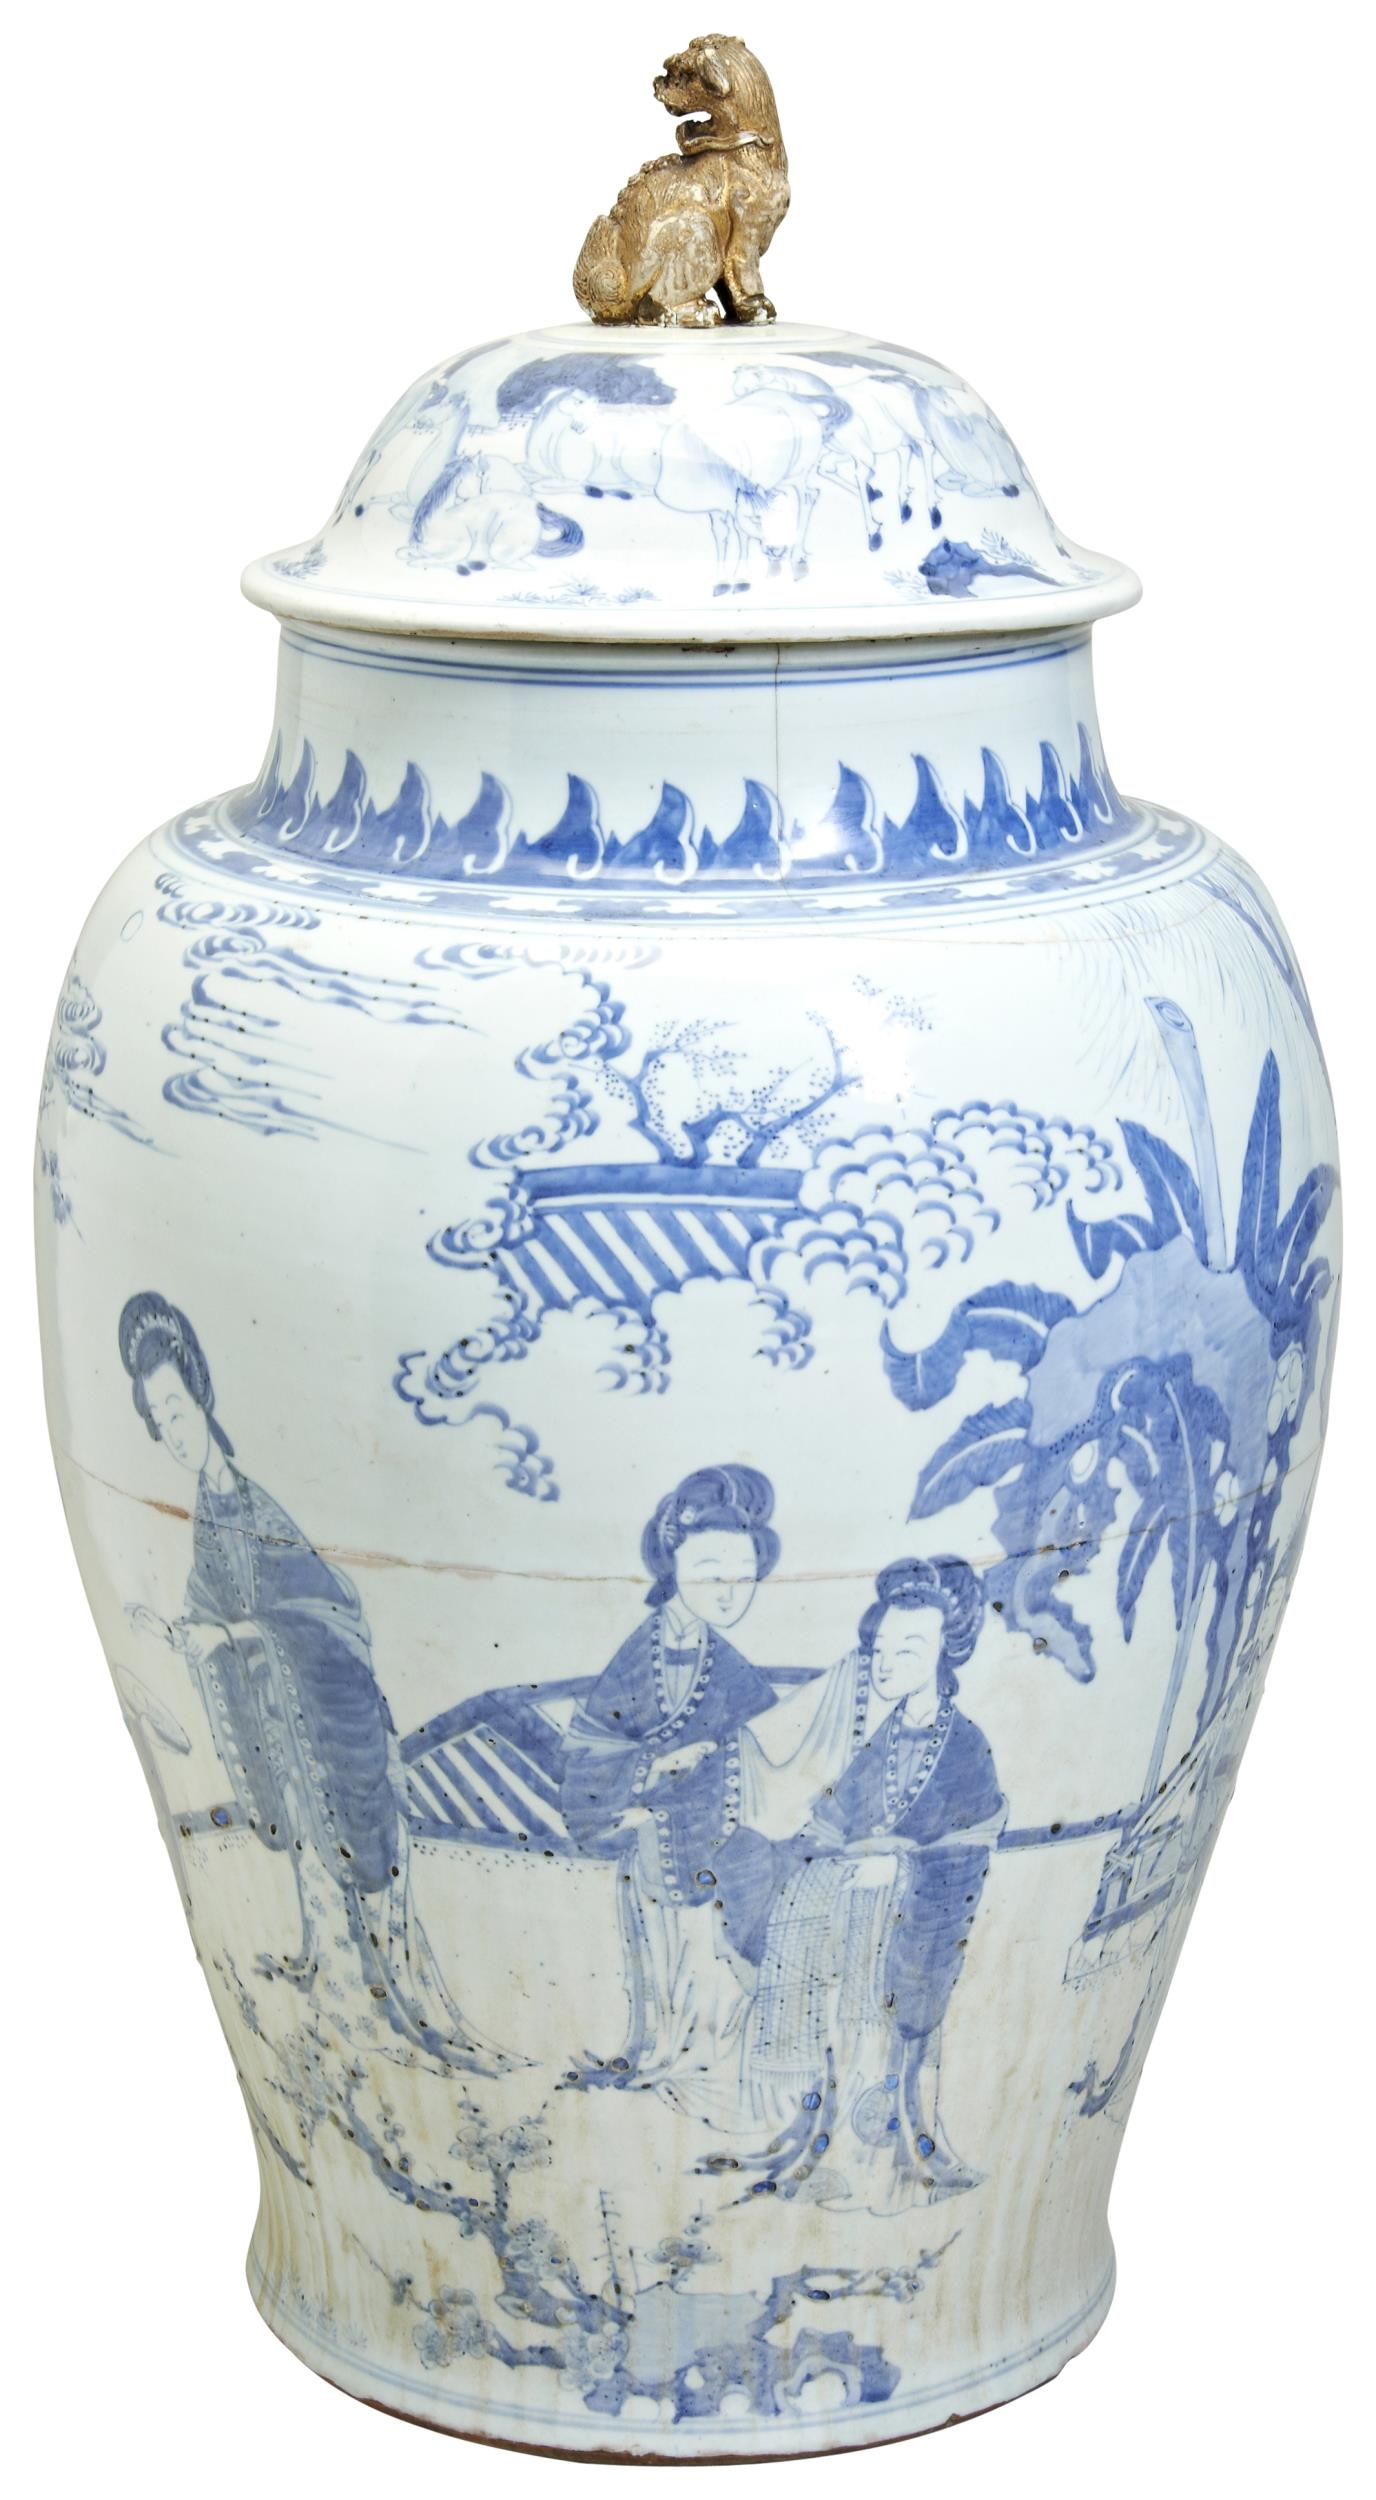 A MONUMENTAL BLUE AND WHITE JAR 17TH / 18TH CENTURY 清十七/十八世纪 青花侍女纹盖罐 the baluster sides decorated in